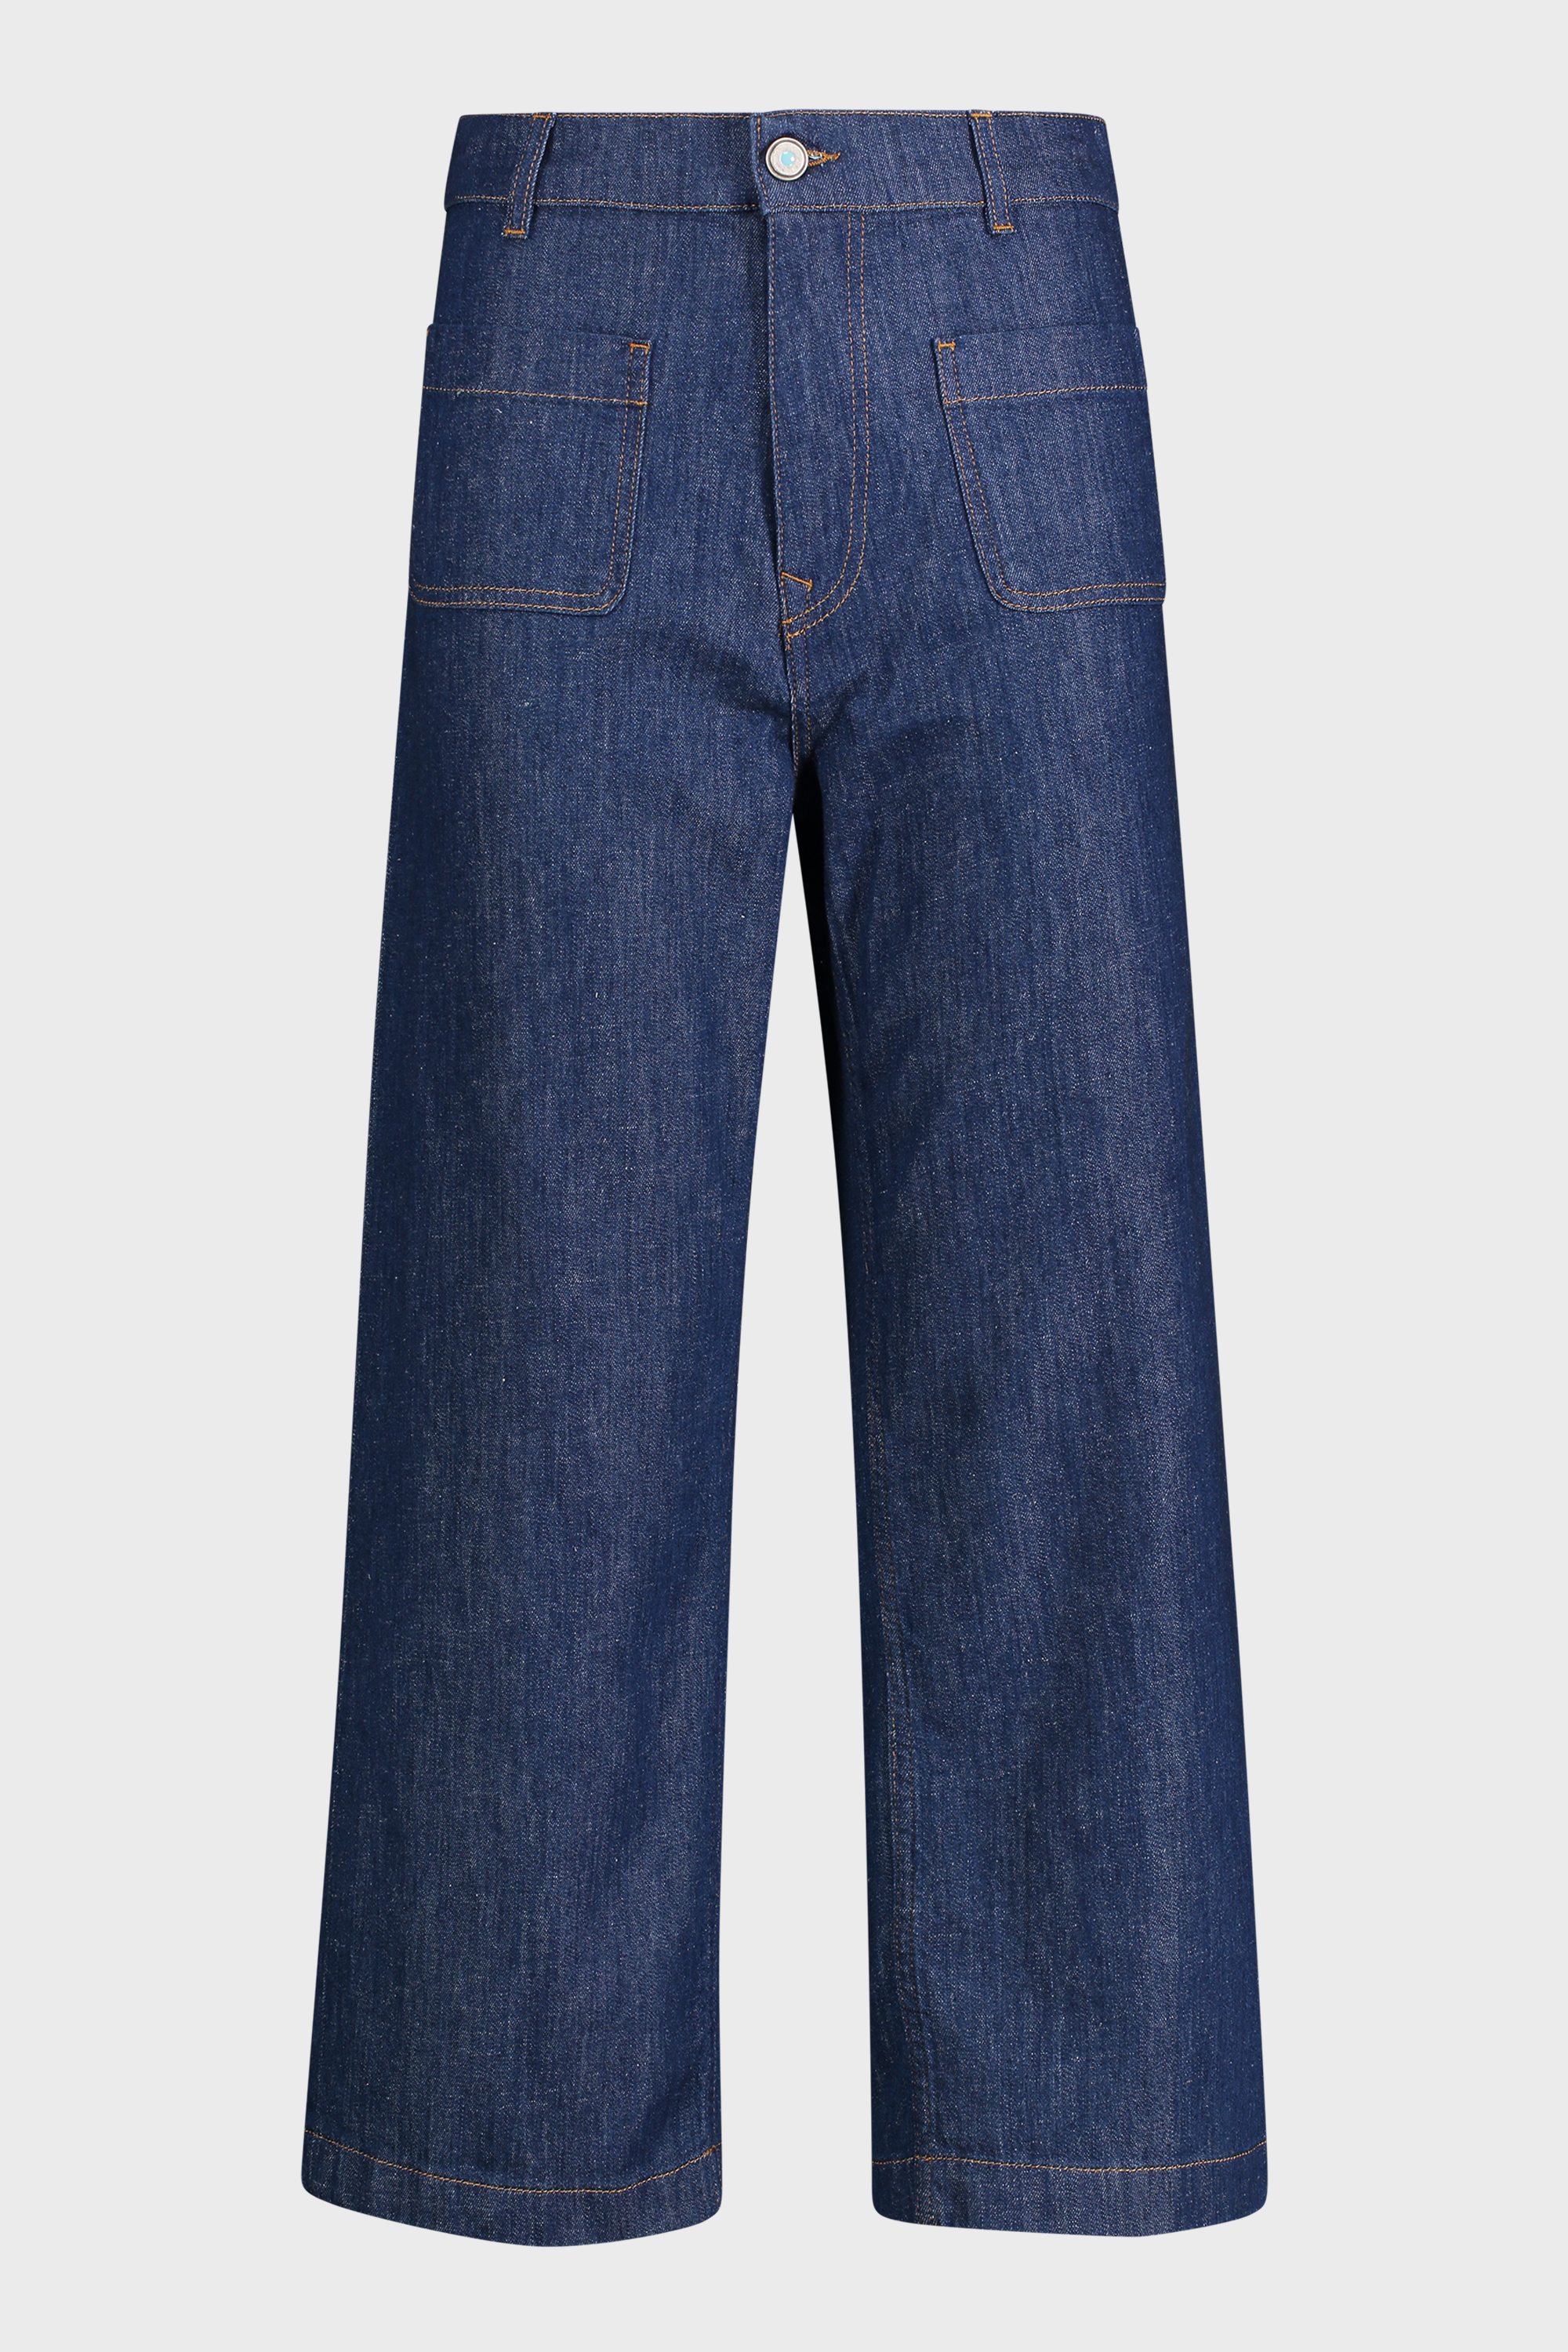 Italian Jeans and Trousers Made in Italy | Re_HasH